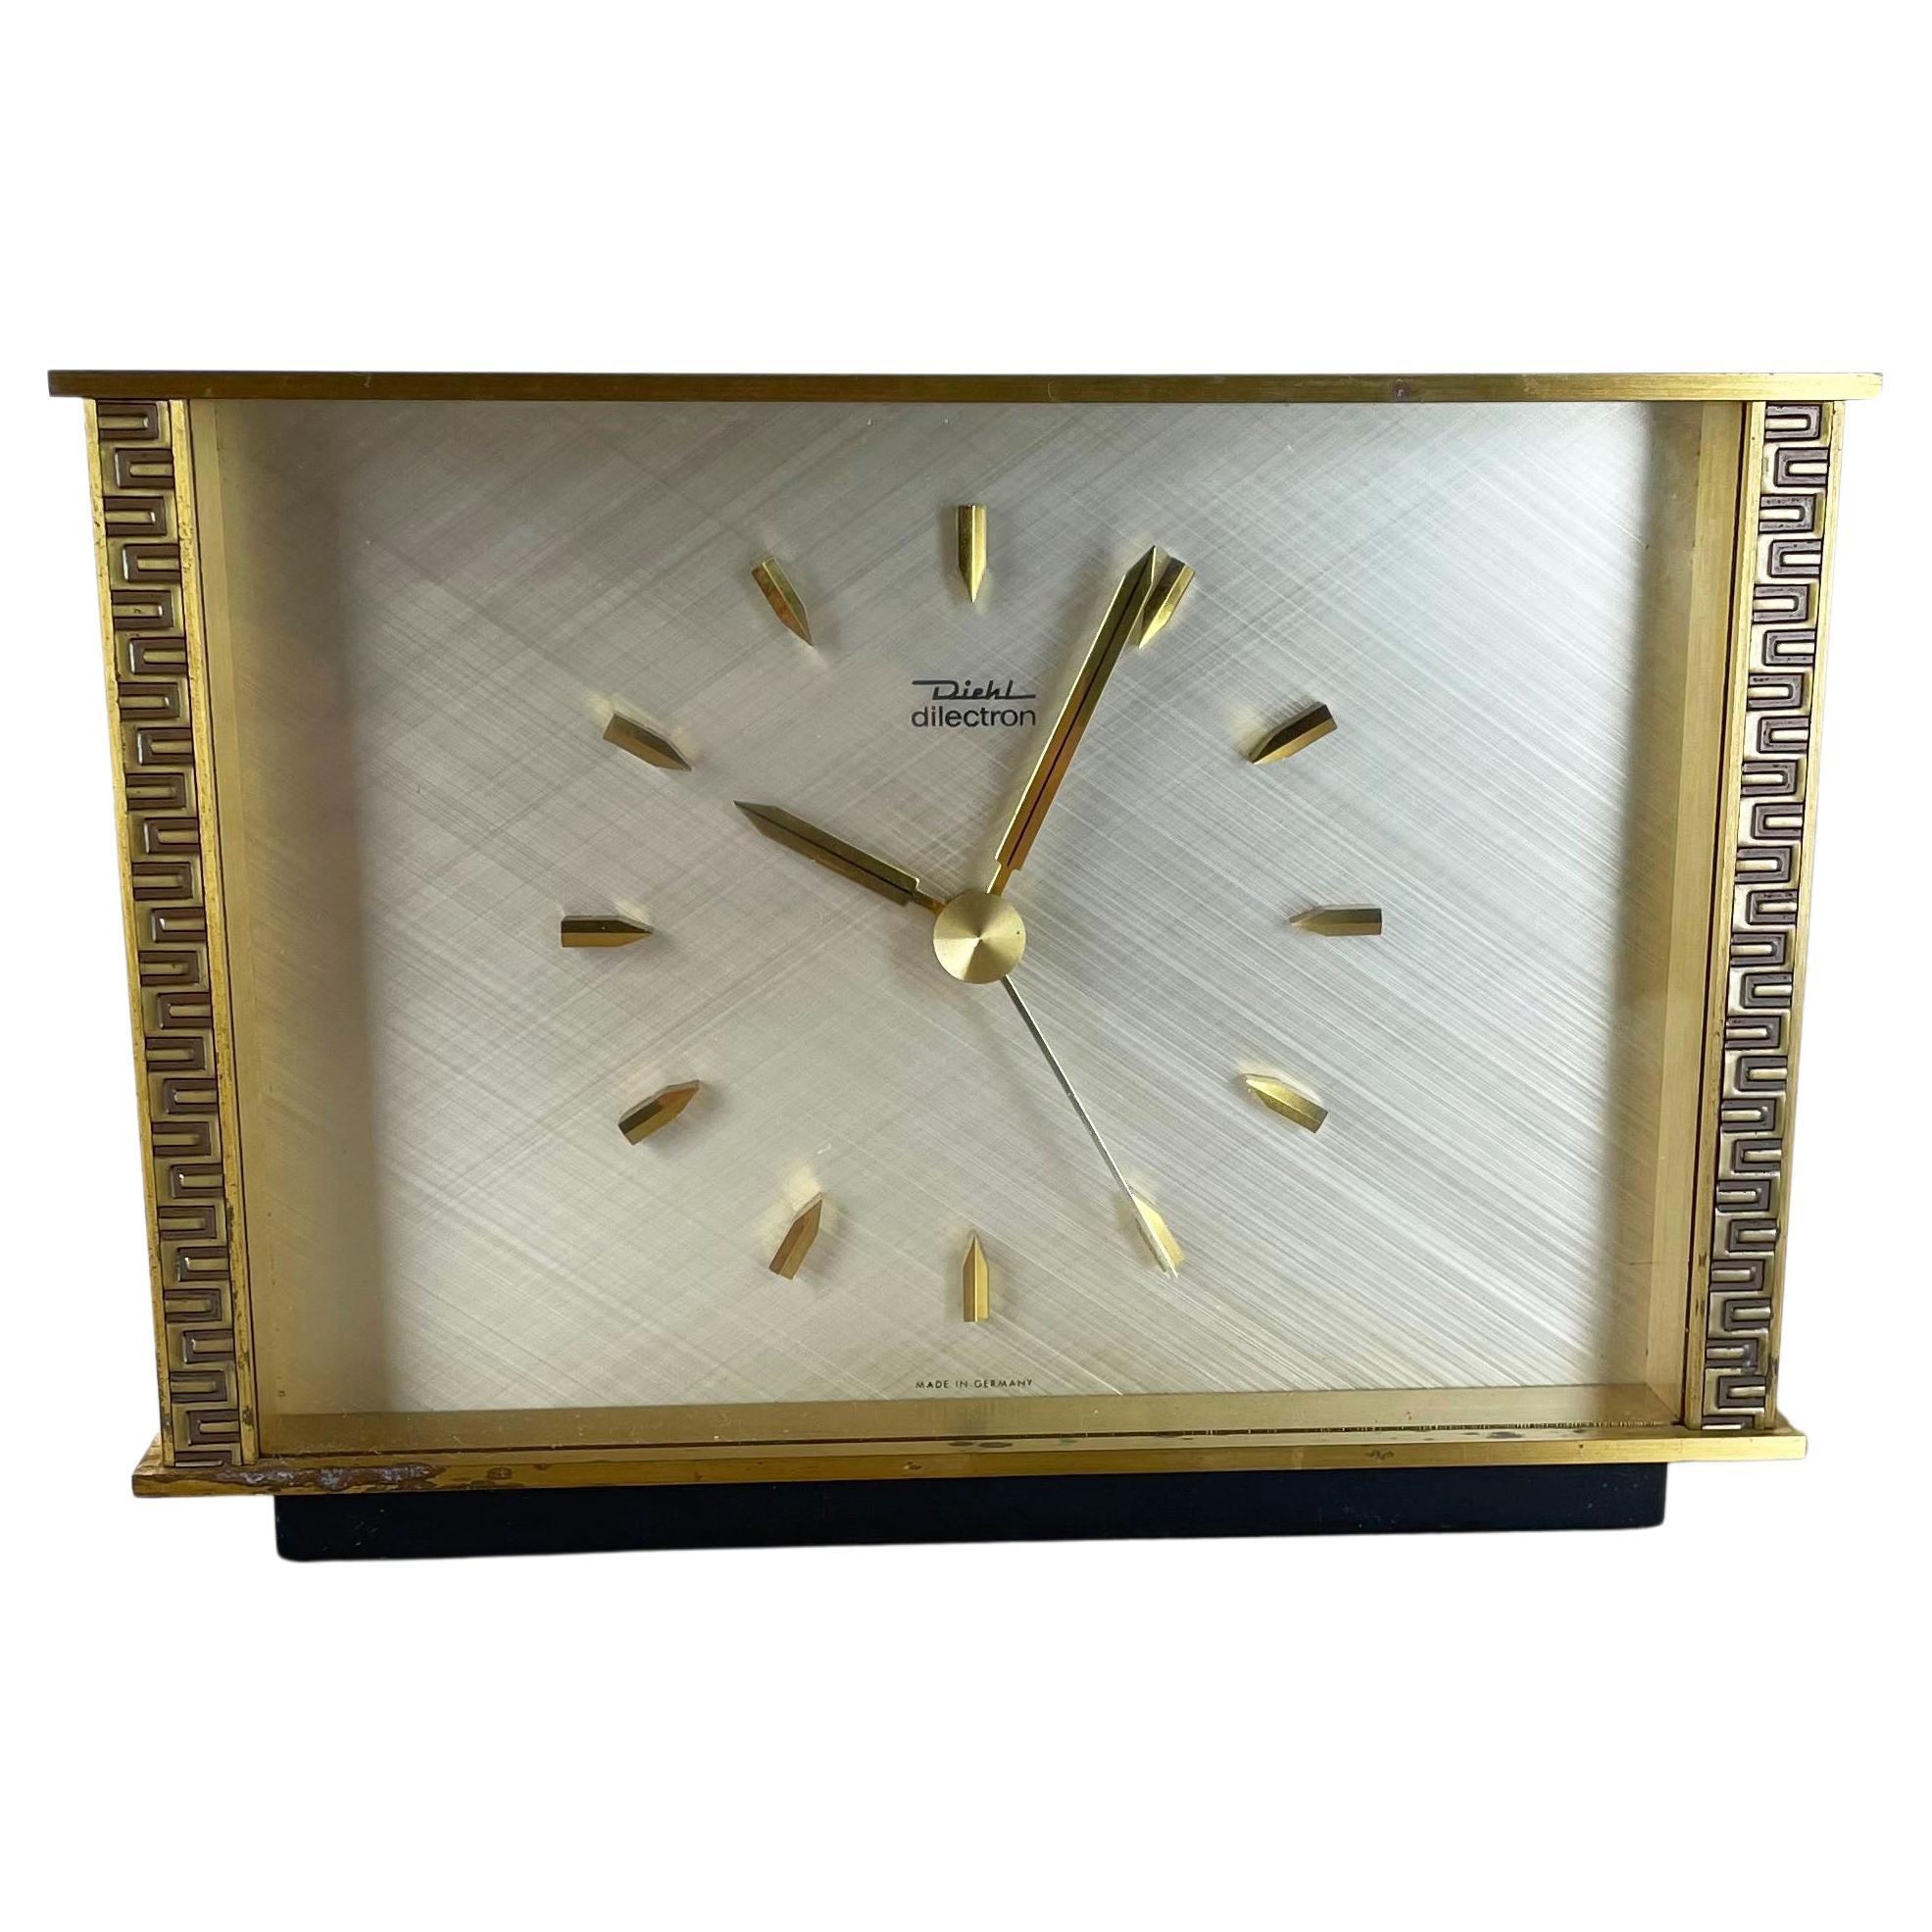 Vintage Modernist Metal Brass Table Clock by Diehl Dilectron, Germany 1960s For Sale